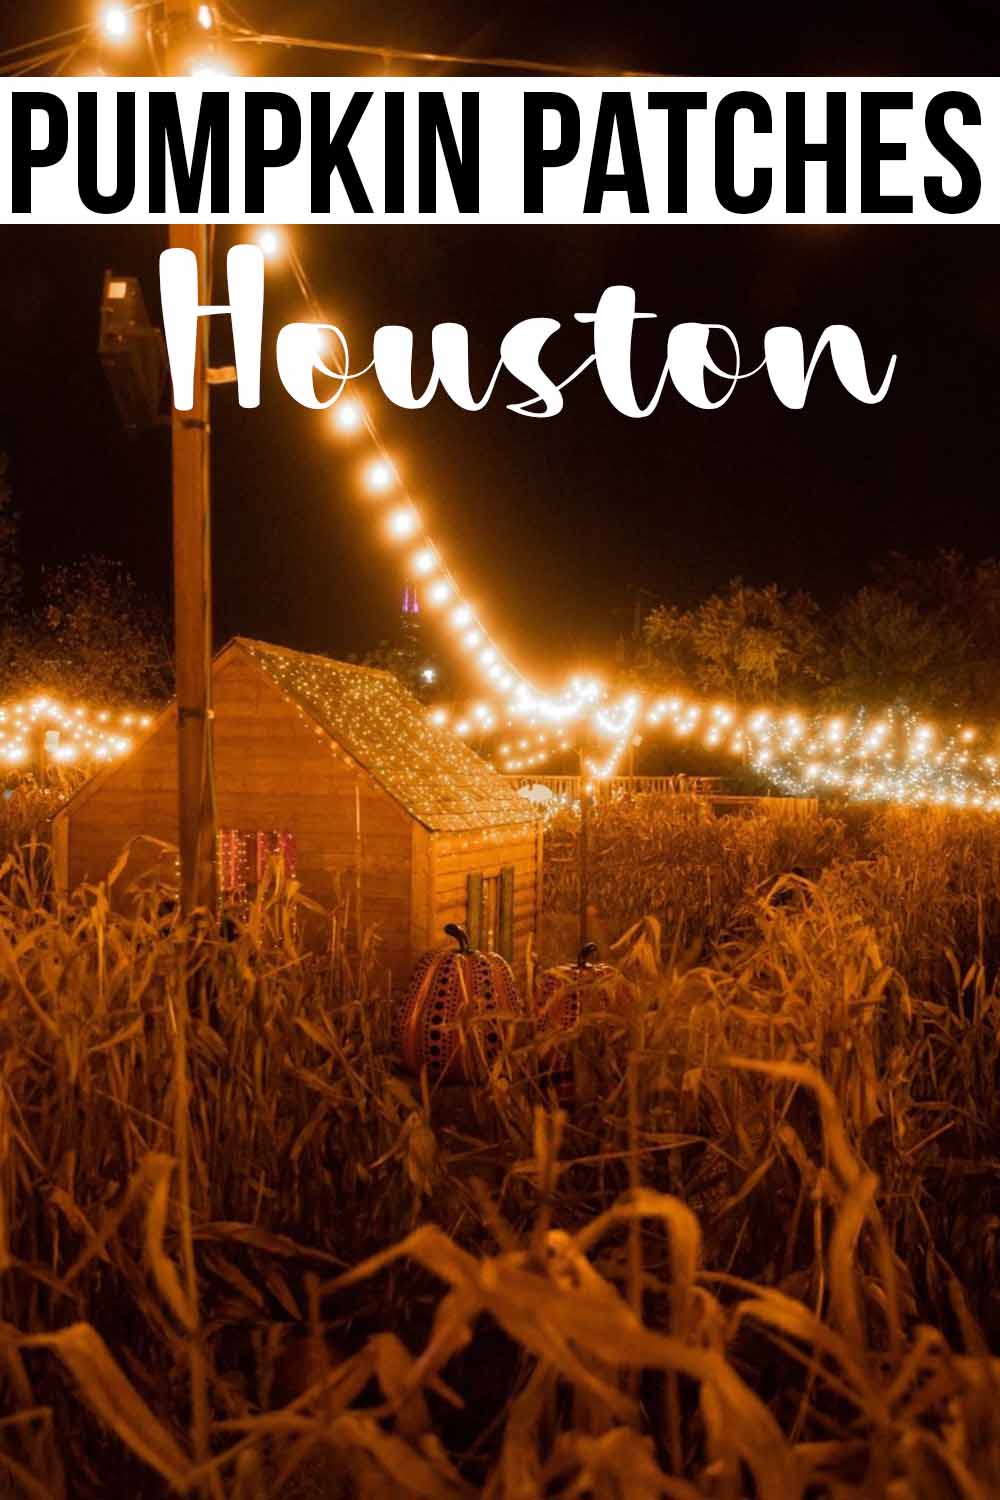 The Best Pumpkin Patches in Houston